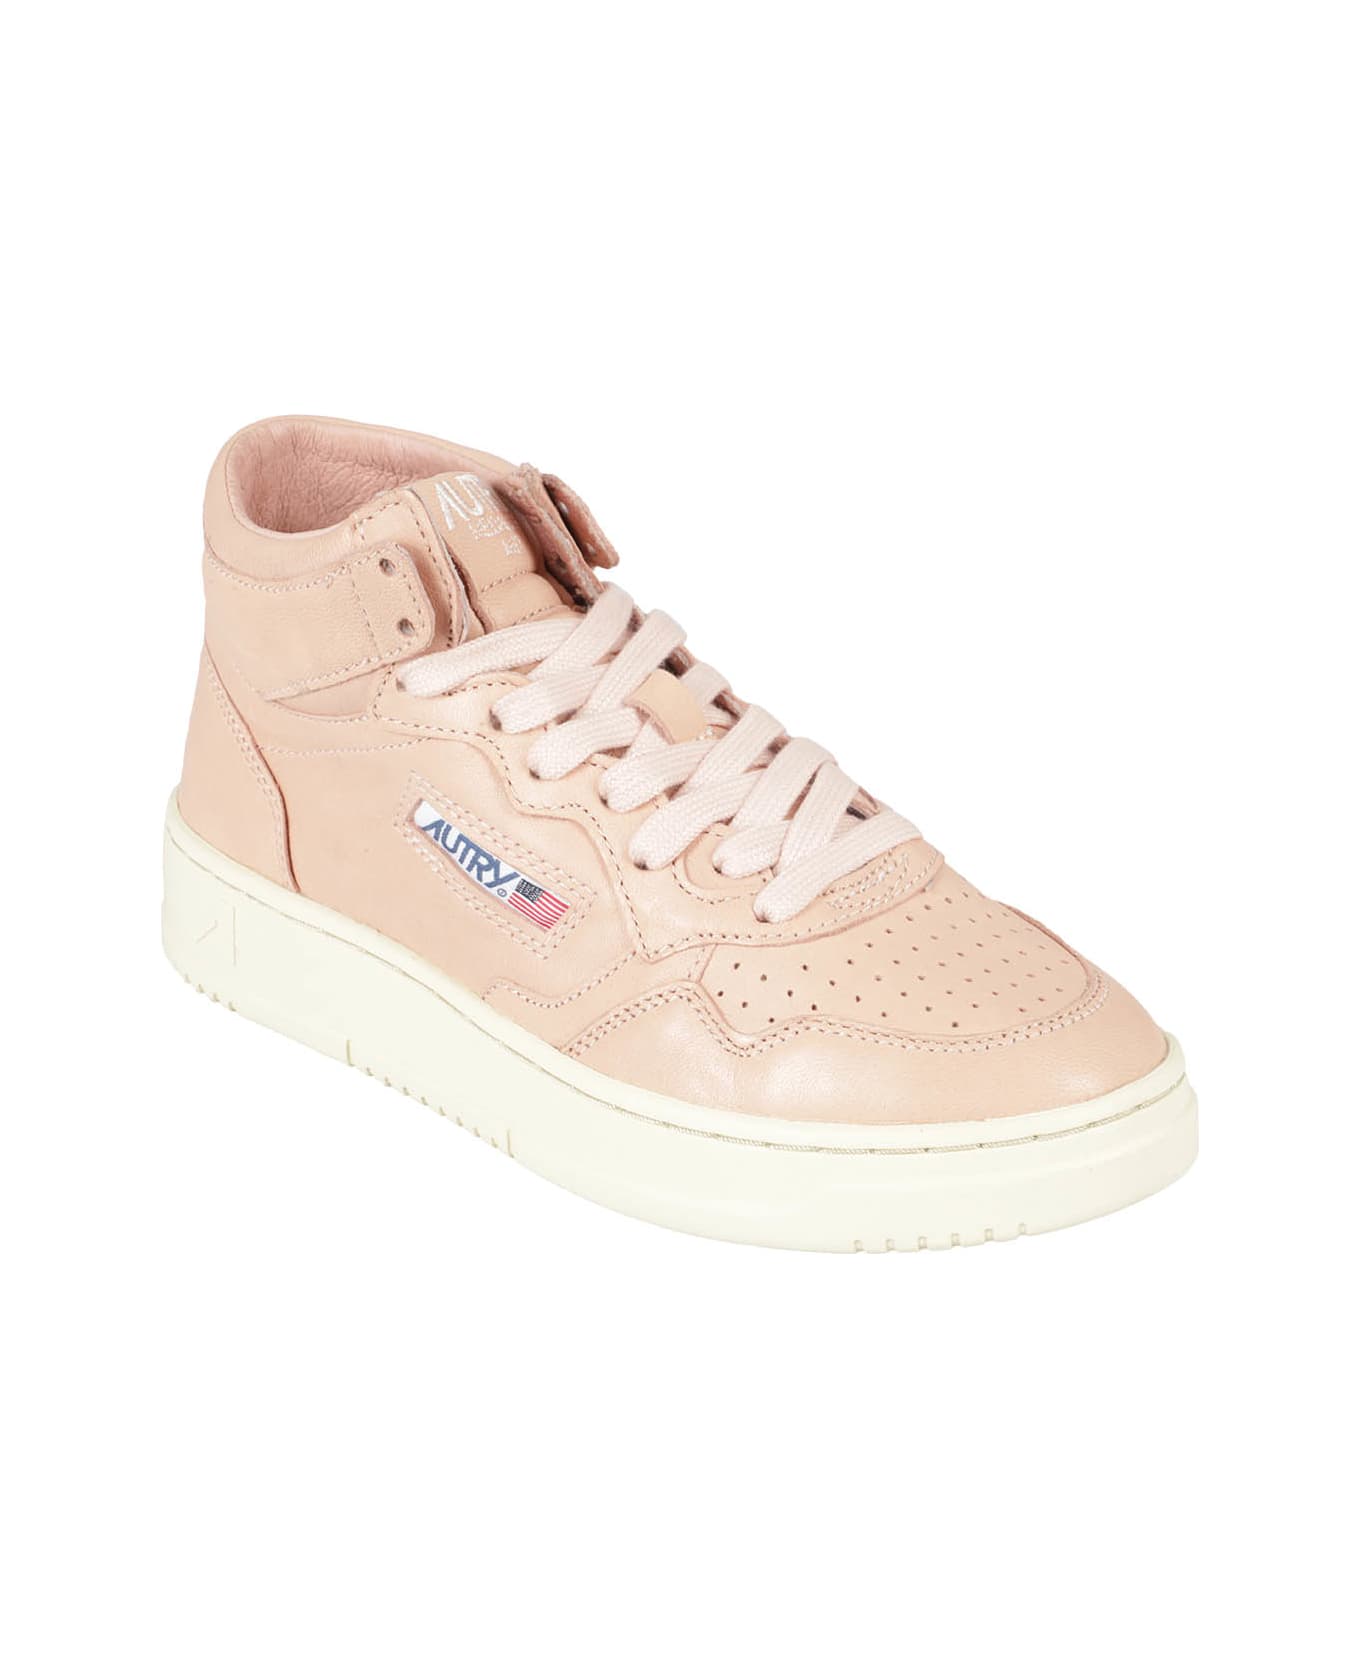 Autry Medalist Mid Sneakers - Goat Peach